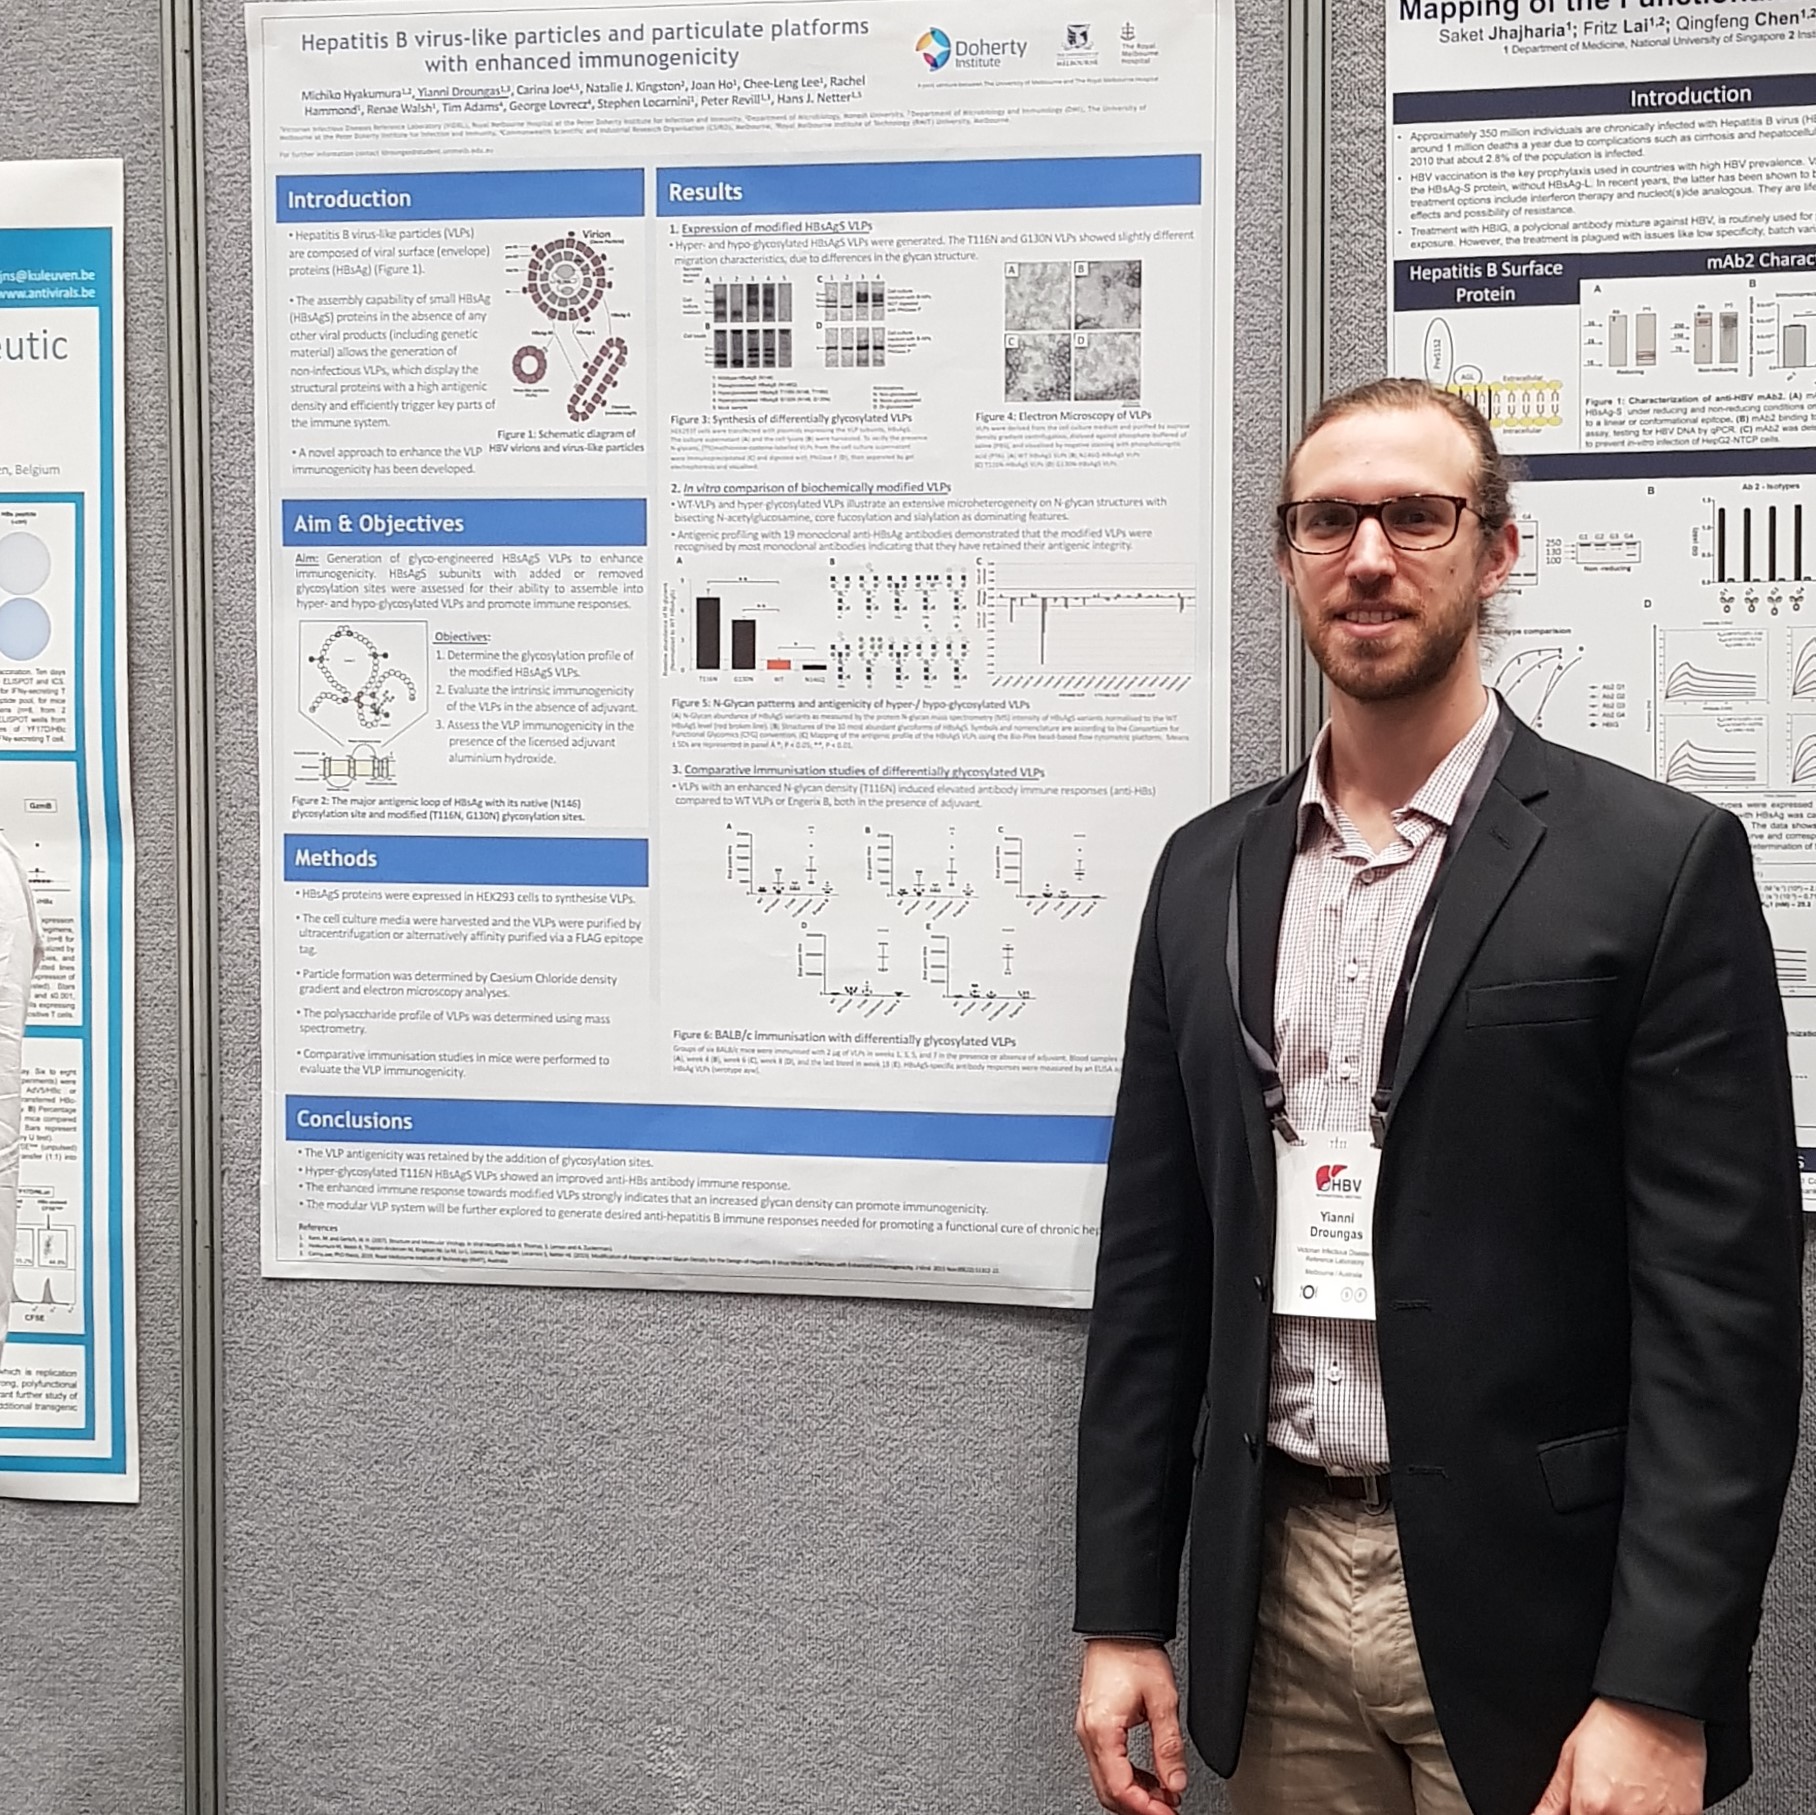 Yianni presents his poster on day 3 of the International HBV Meeting